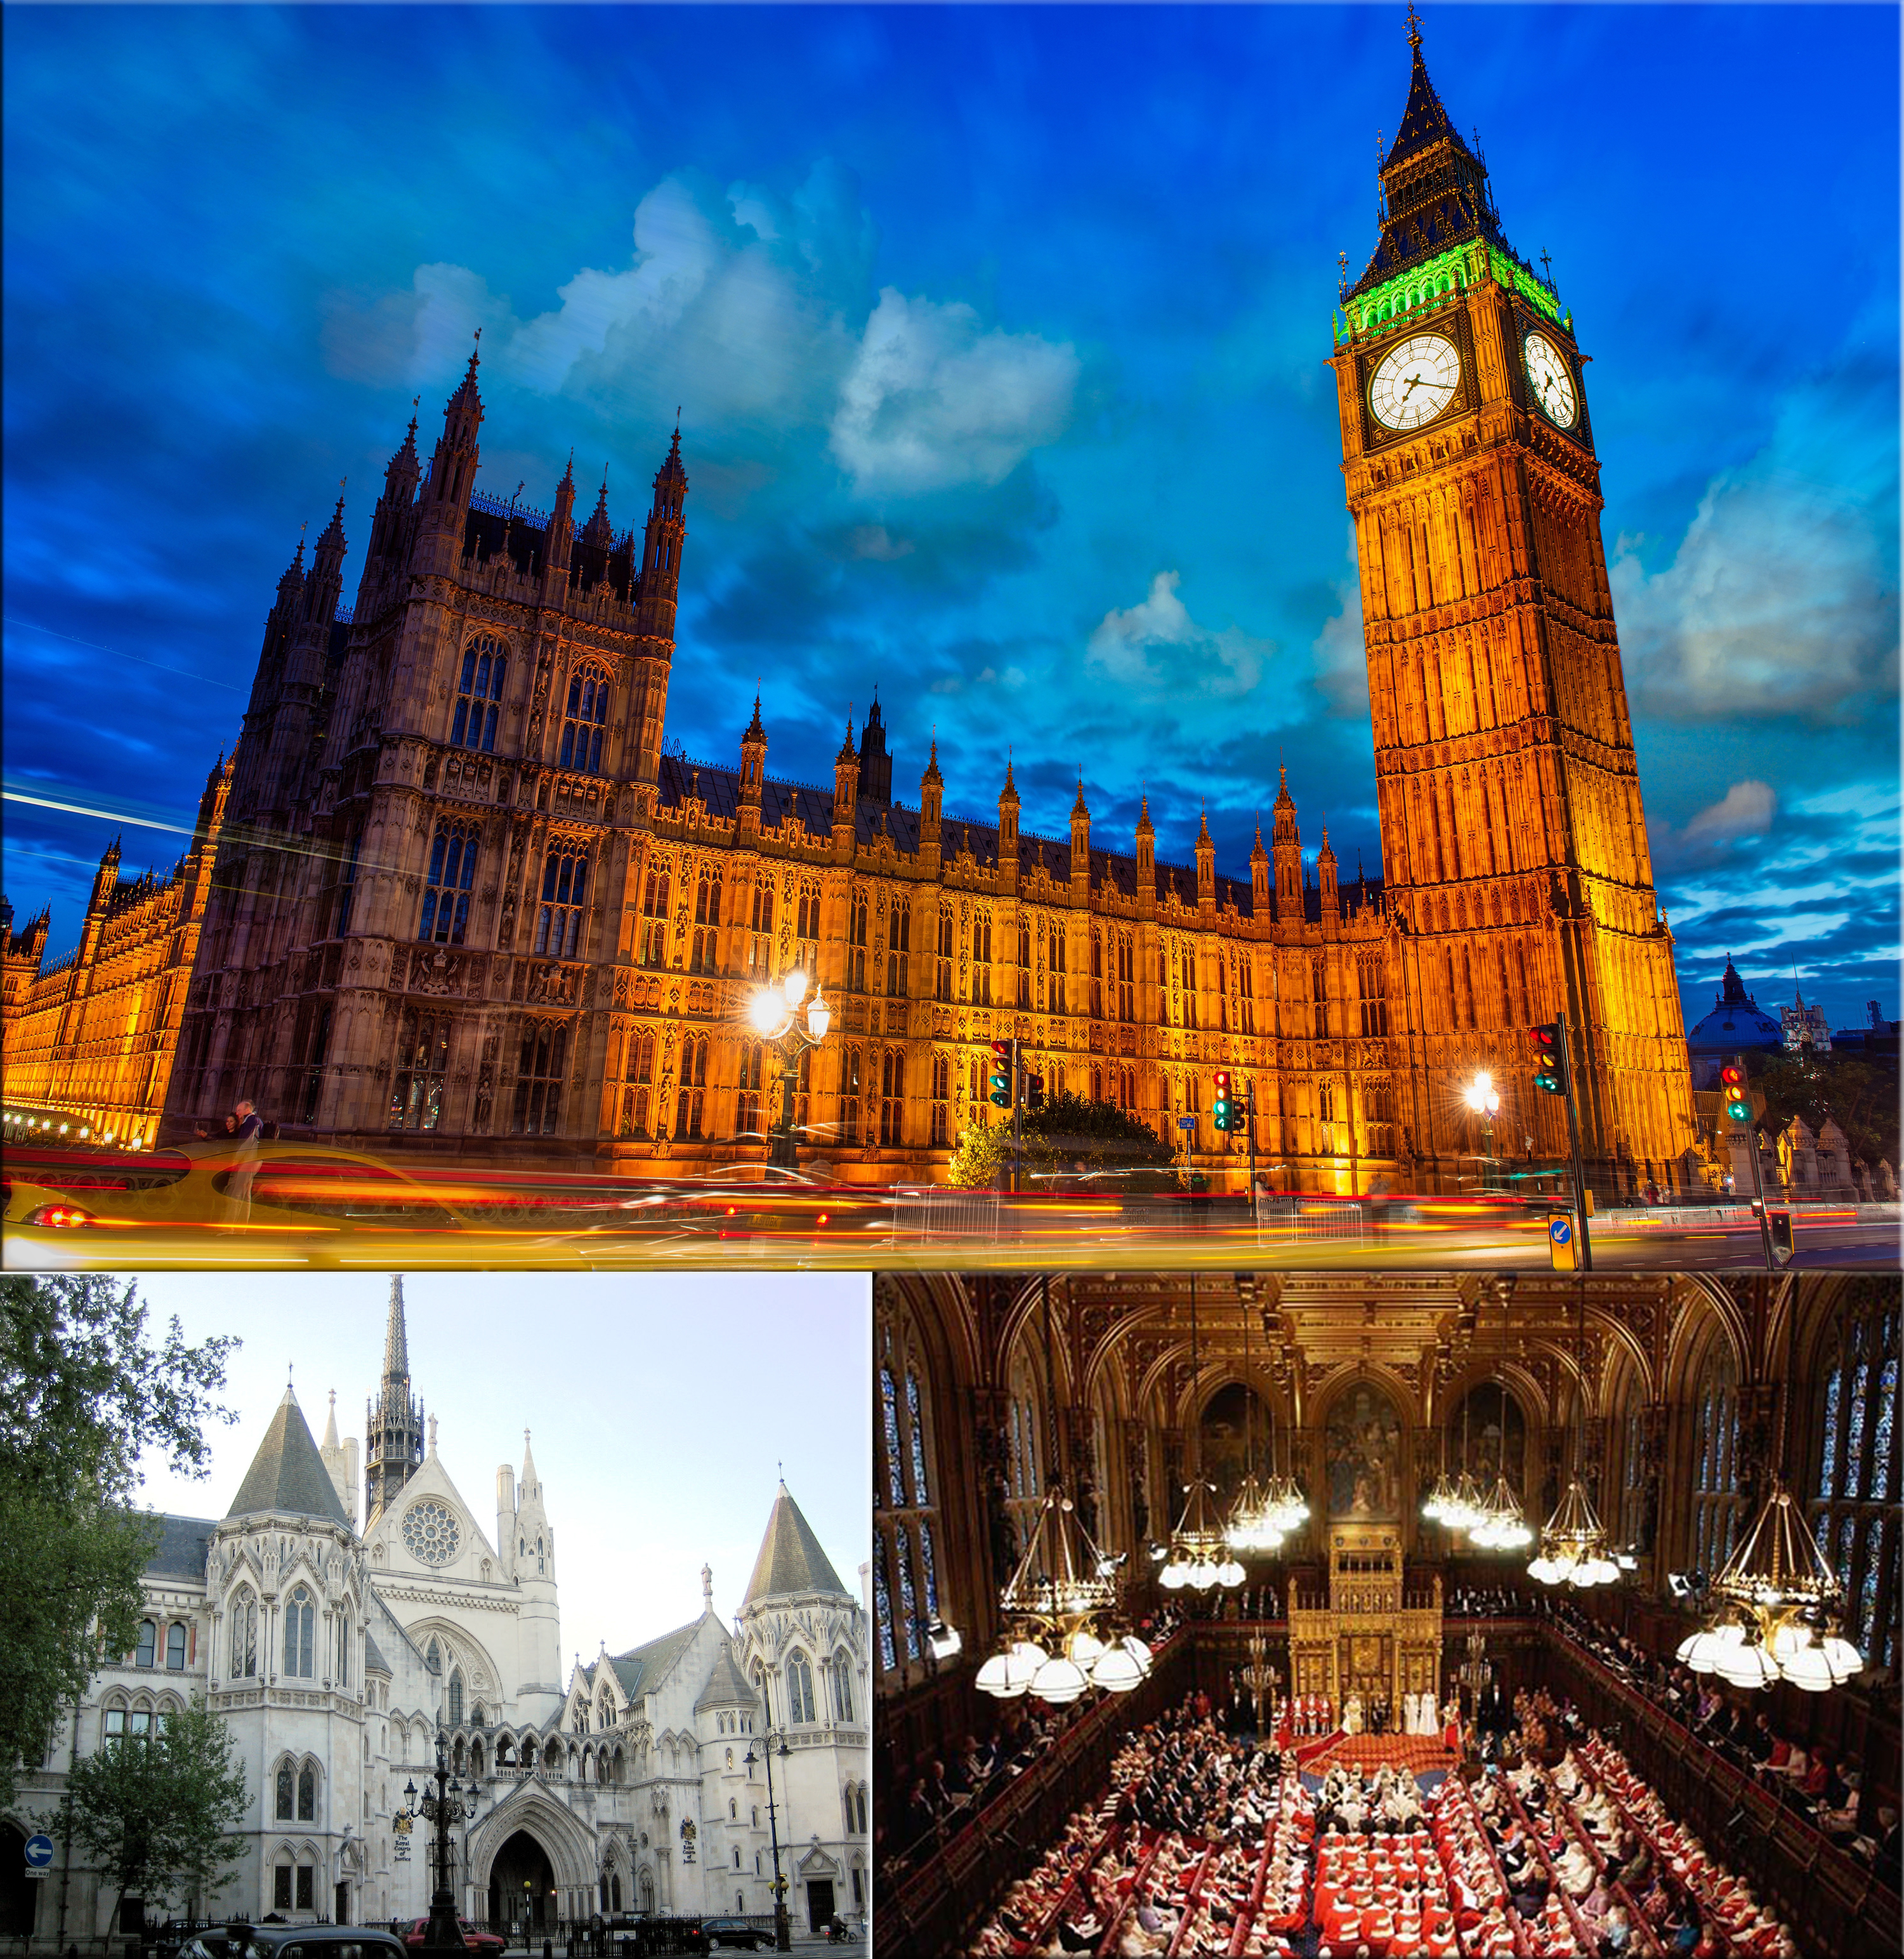 The Supreme Court of the United Kingdom takes over the judicial functions of the House of Lords